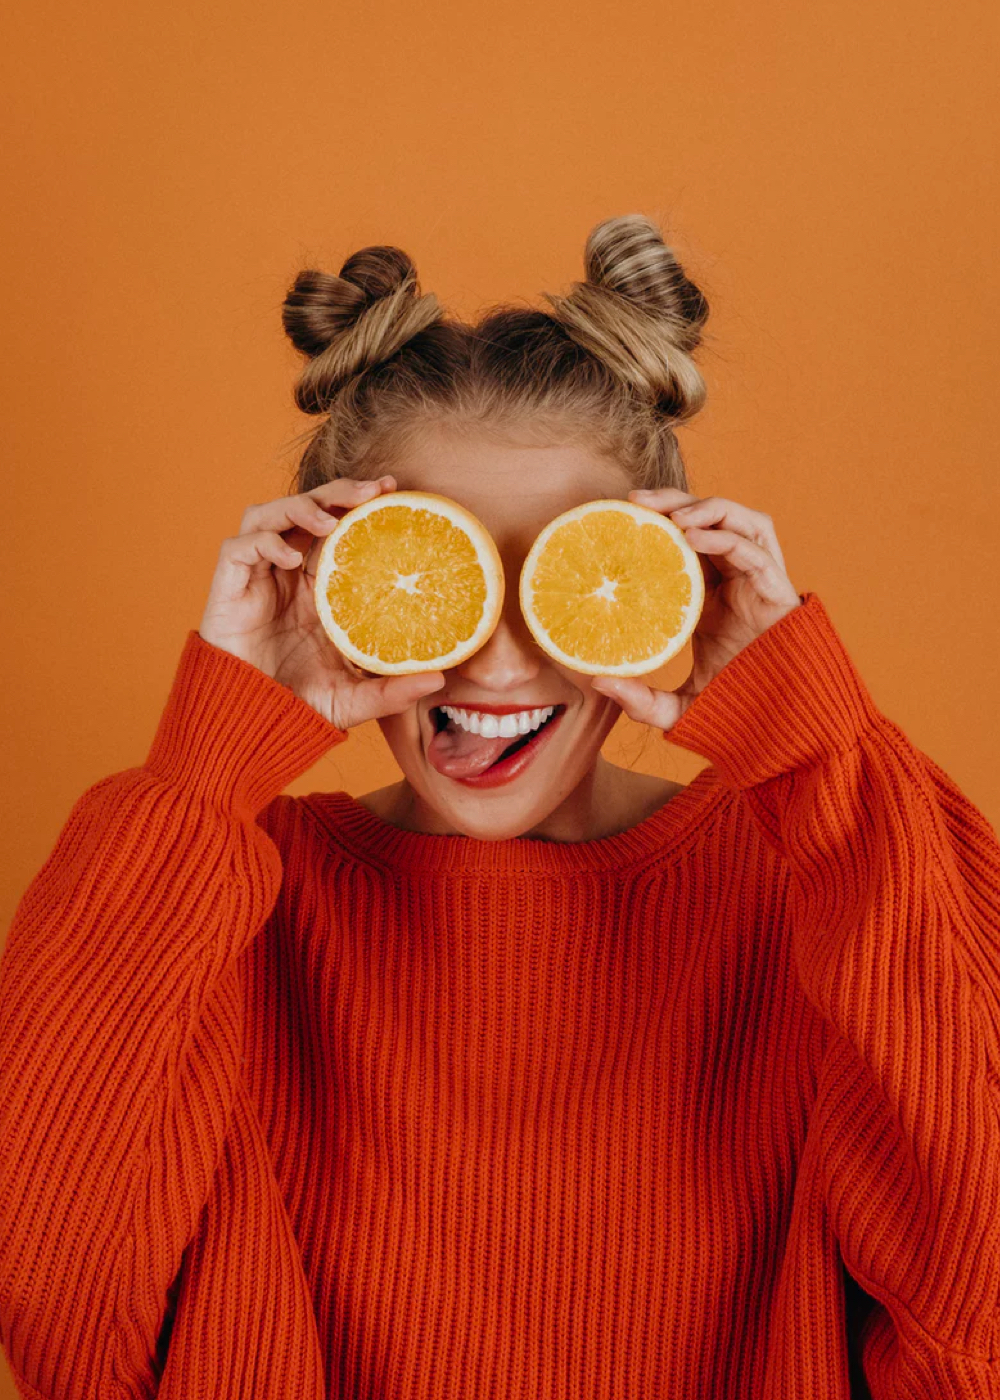 Sophie holding two slices of oranges around her eyes, while smiling with her tongue hanging out.